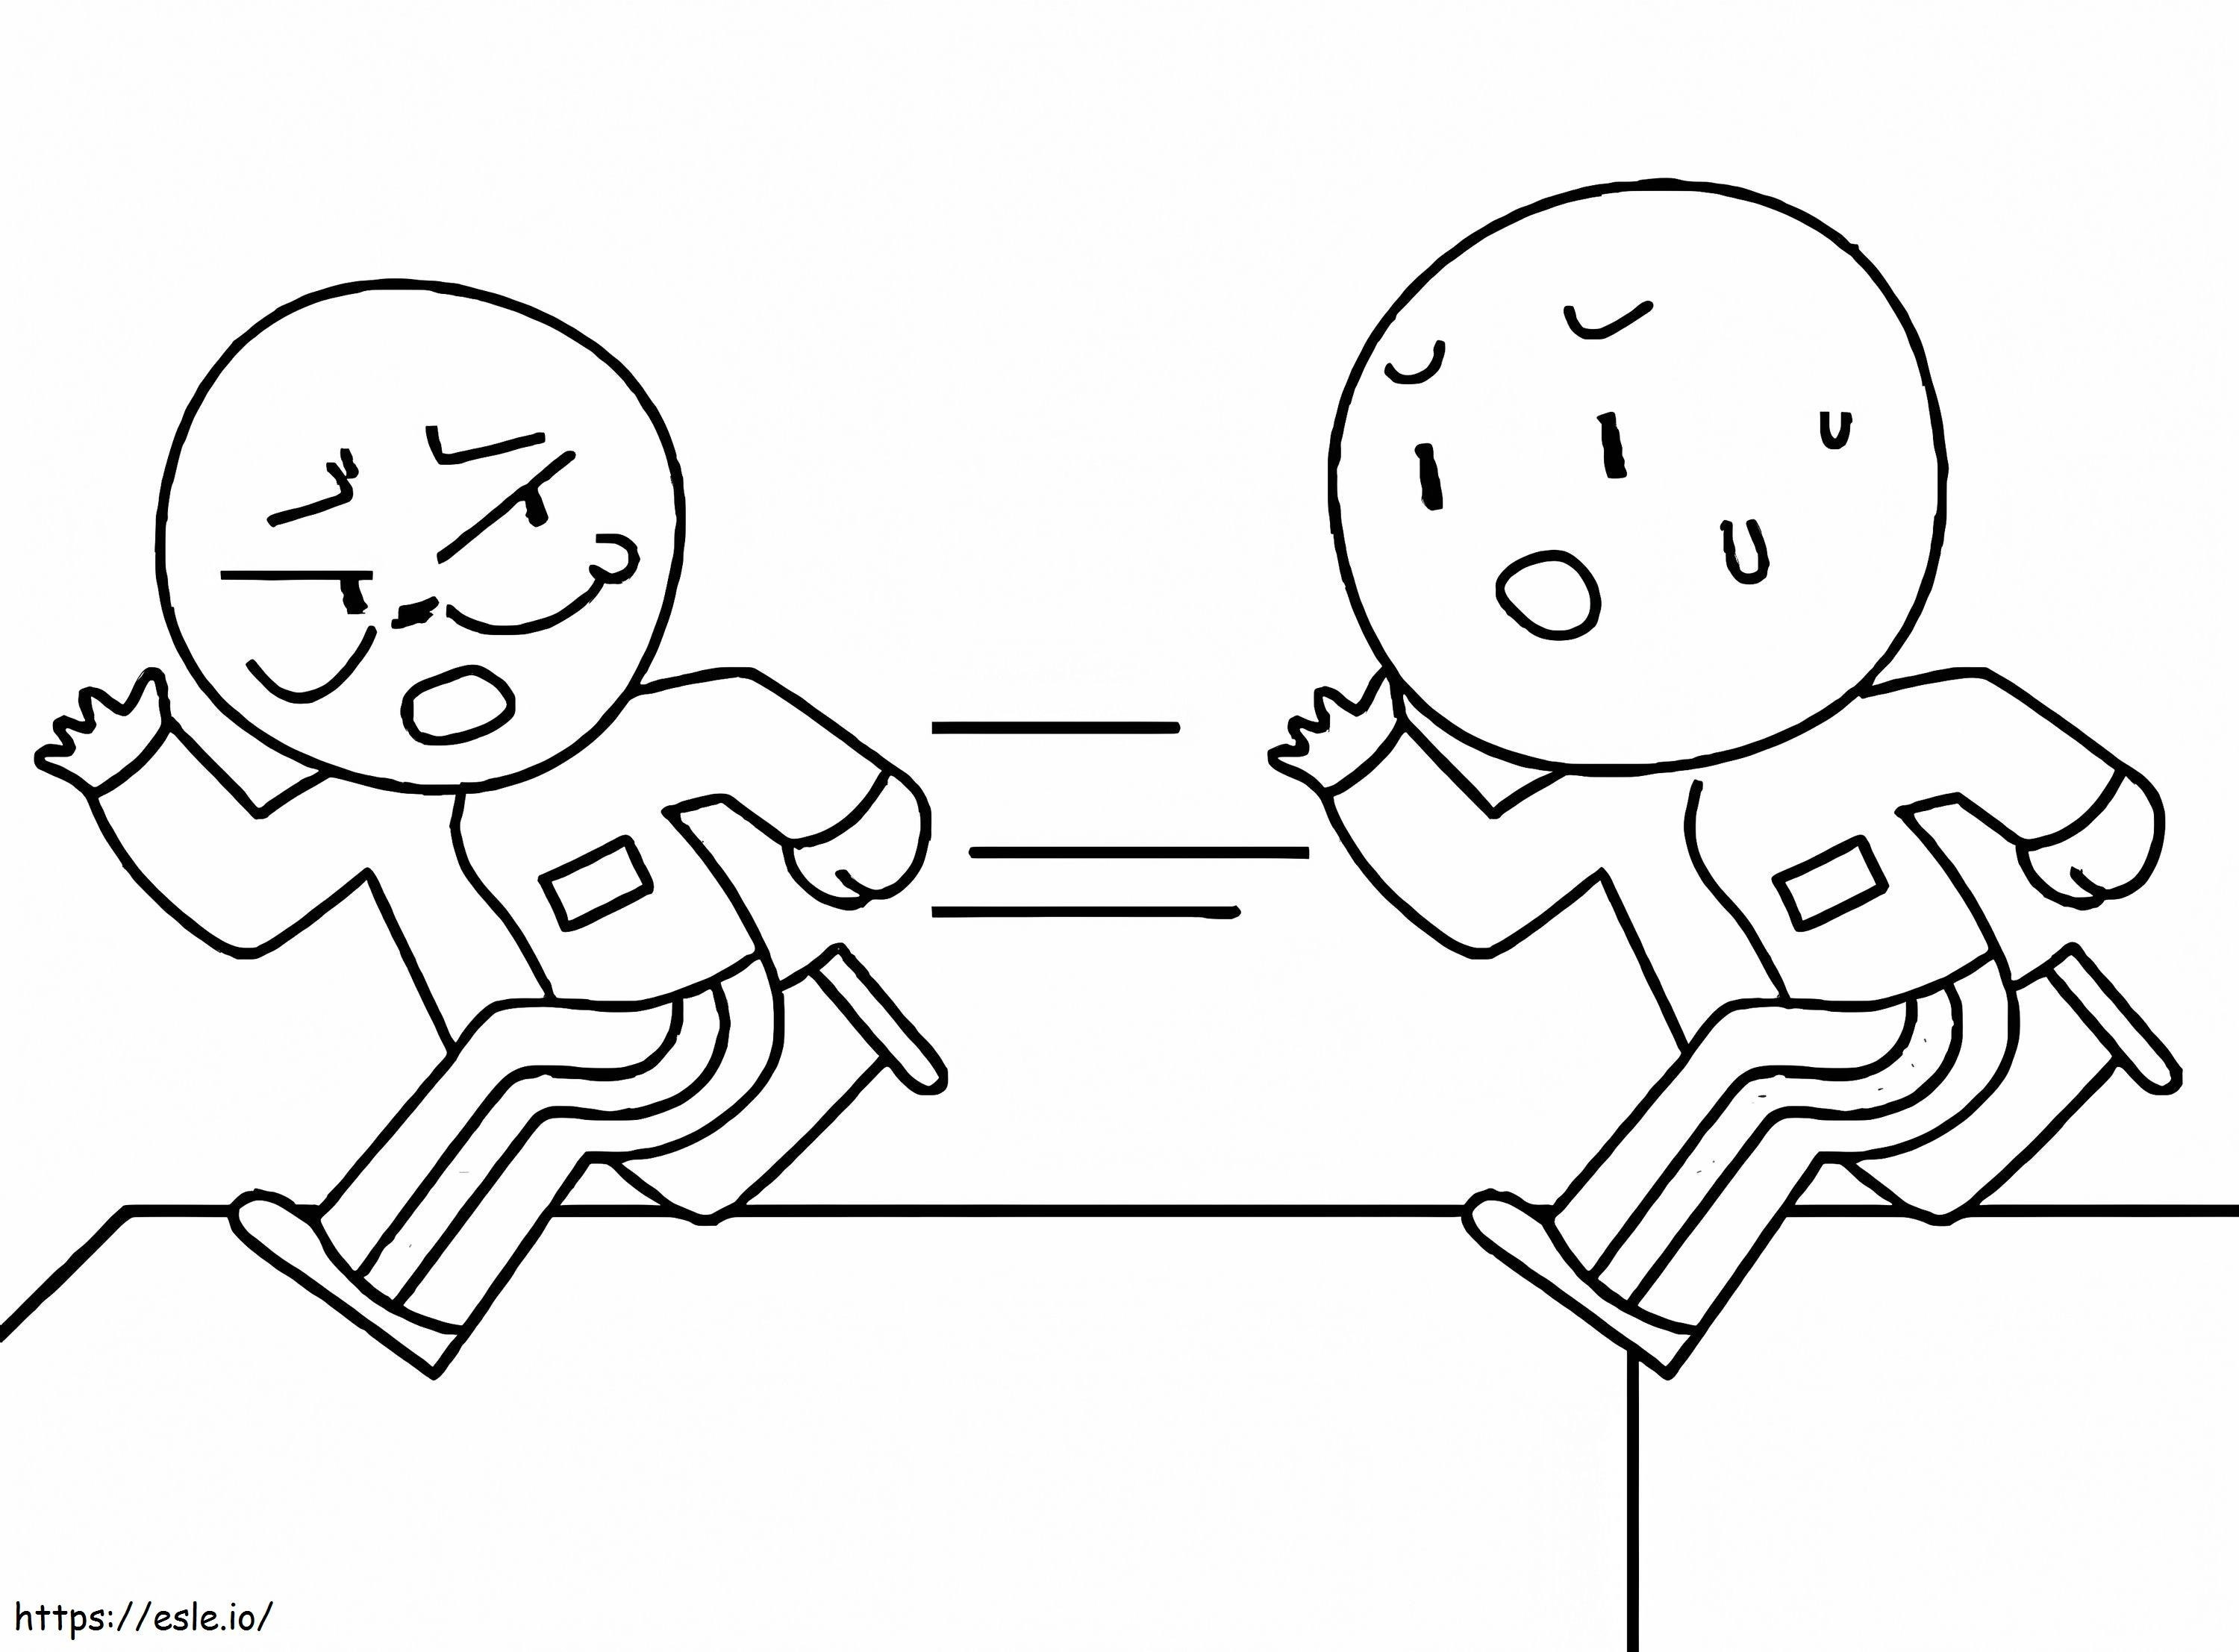 Two squid game players running coloring page